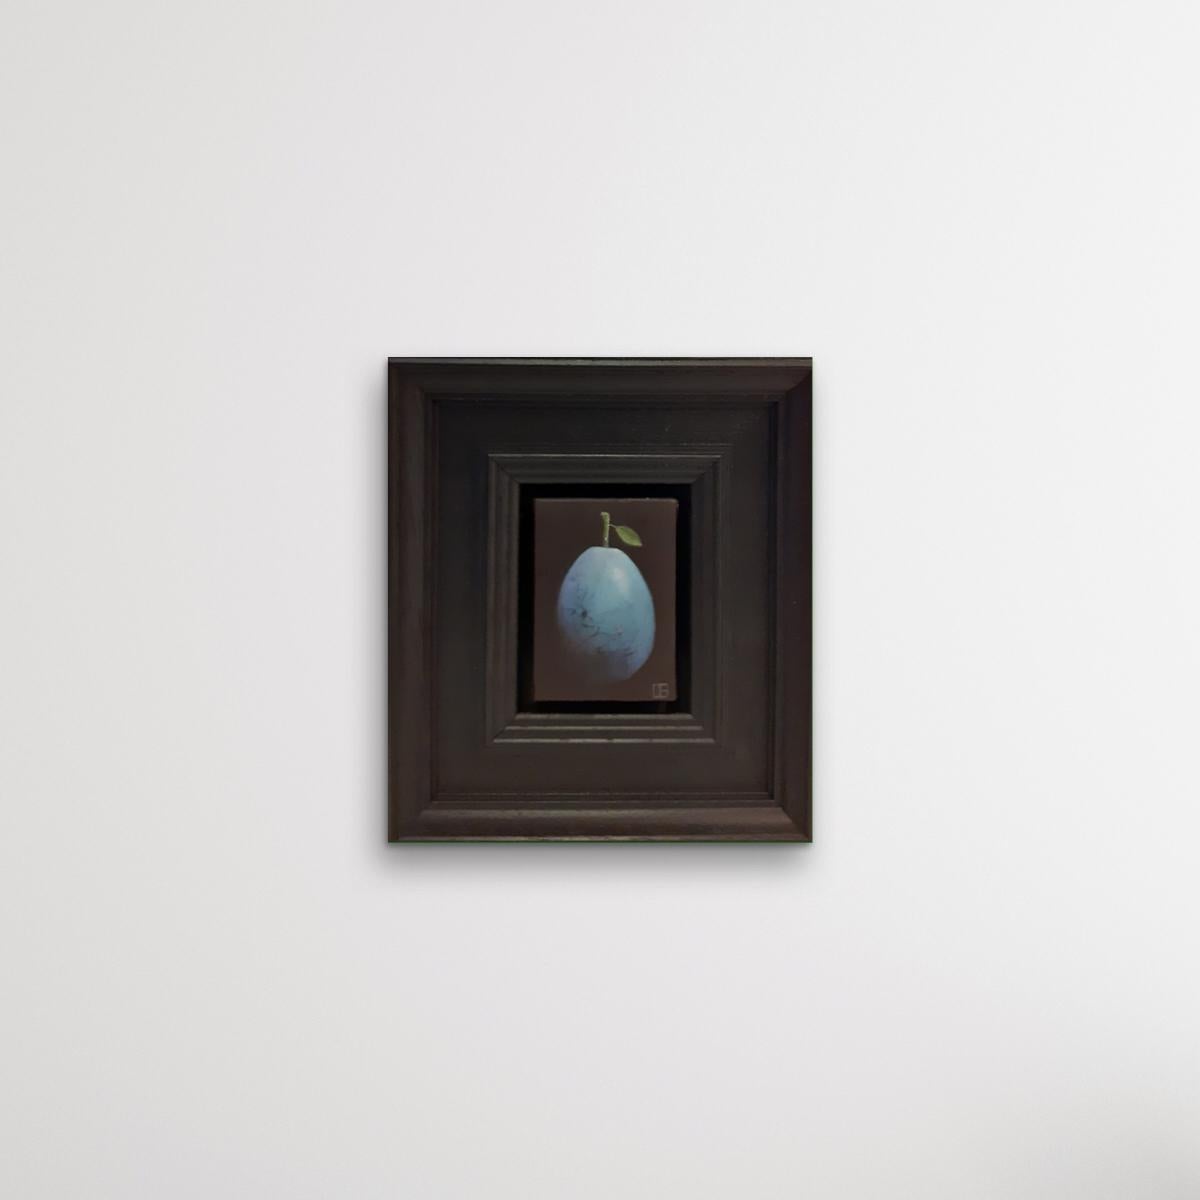 Pocket Blue Damson by Dani Humberstone [2022]

Pocket Blue Damson is an original oil painting by Dani Humberstone. Featuring her signature & beautifully considered realist style alongside a bold dark frame which gives this simple still life a touch